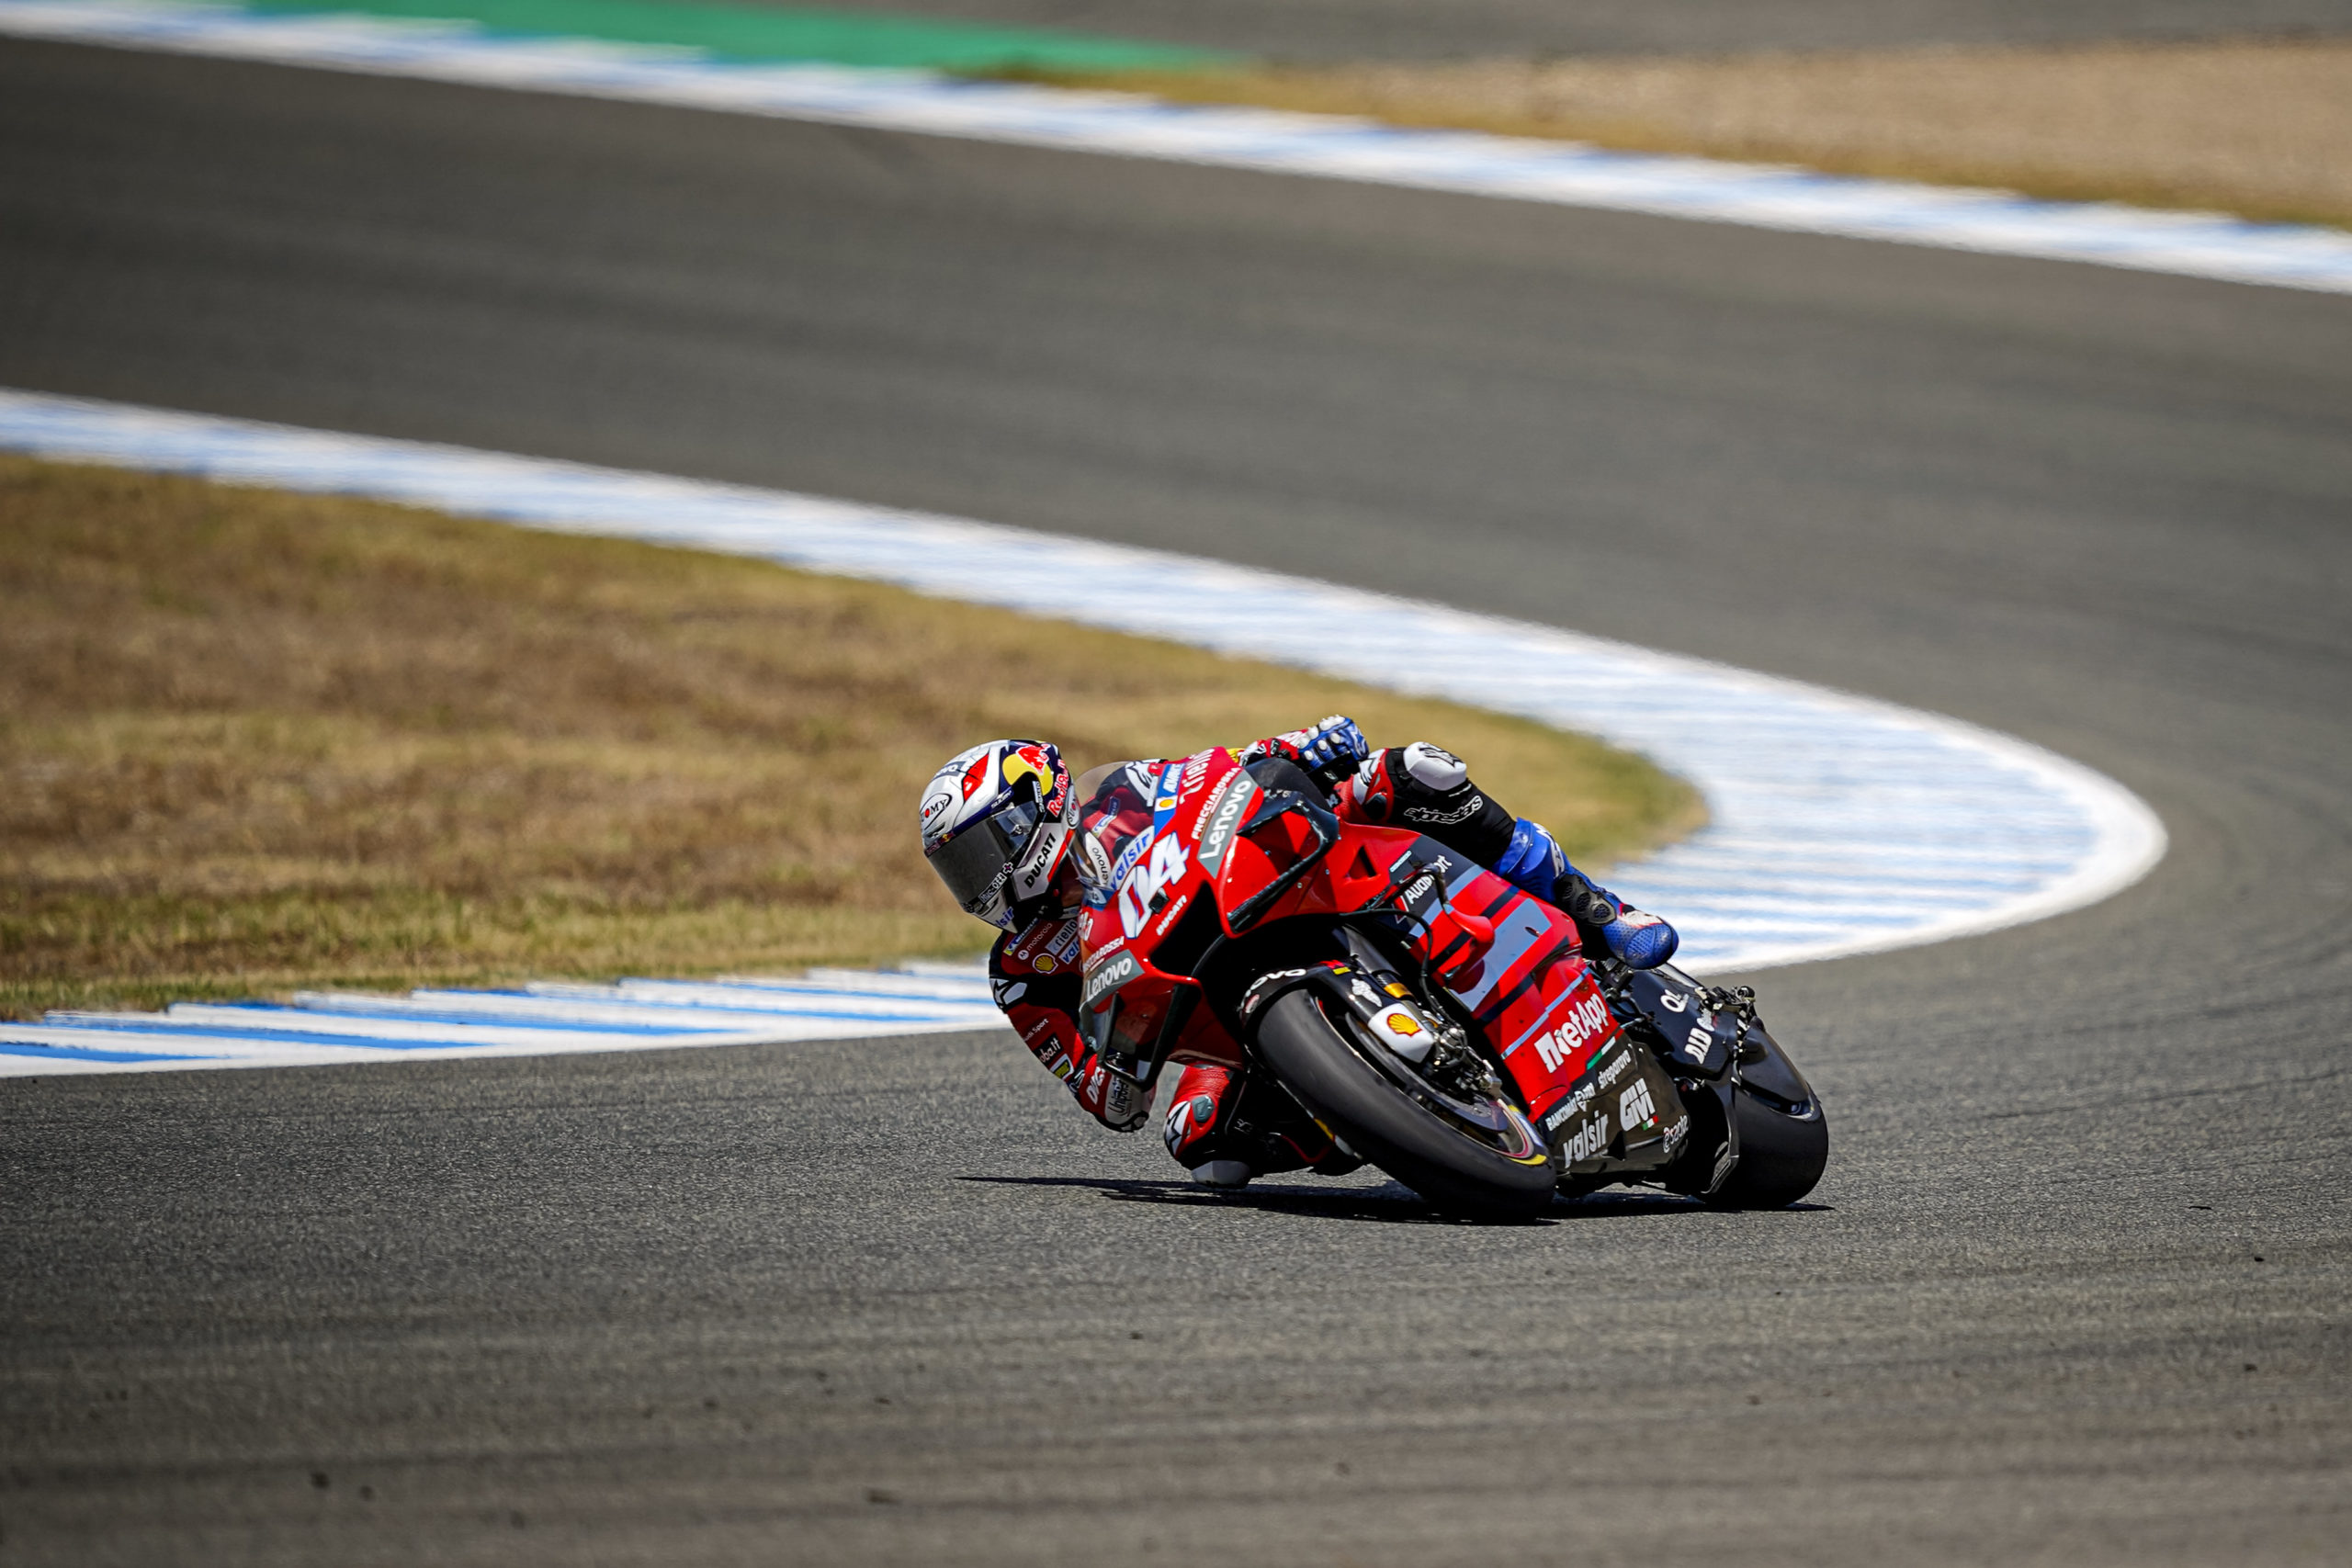 Dovizioso, a deserved third place